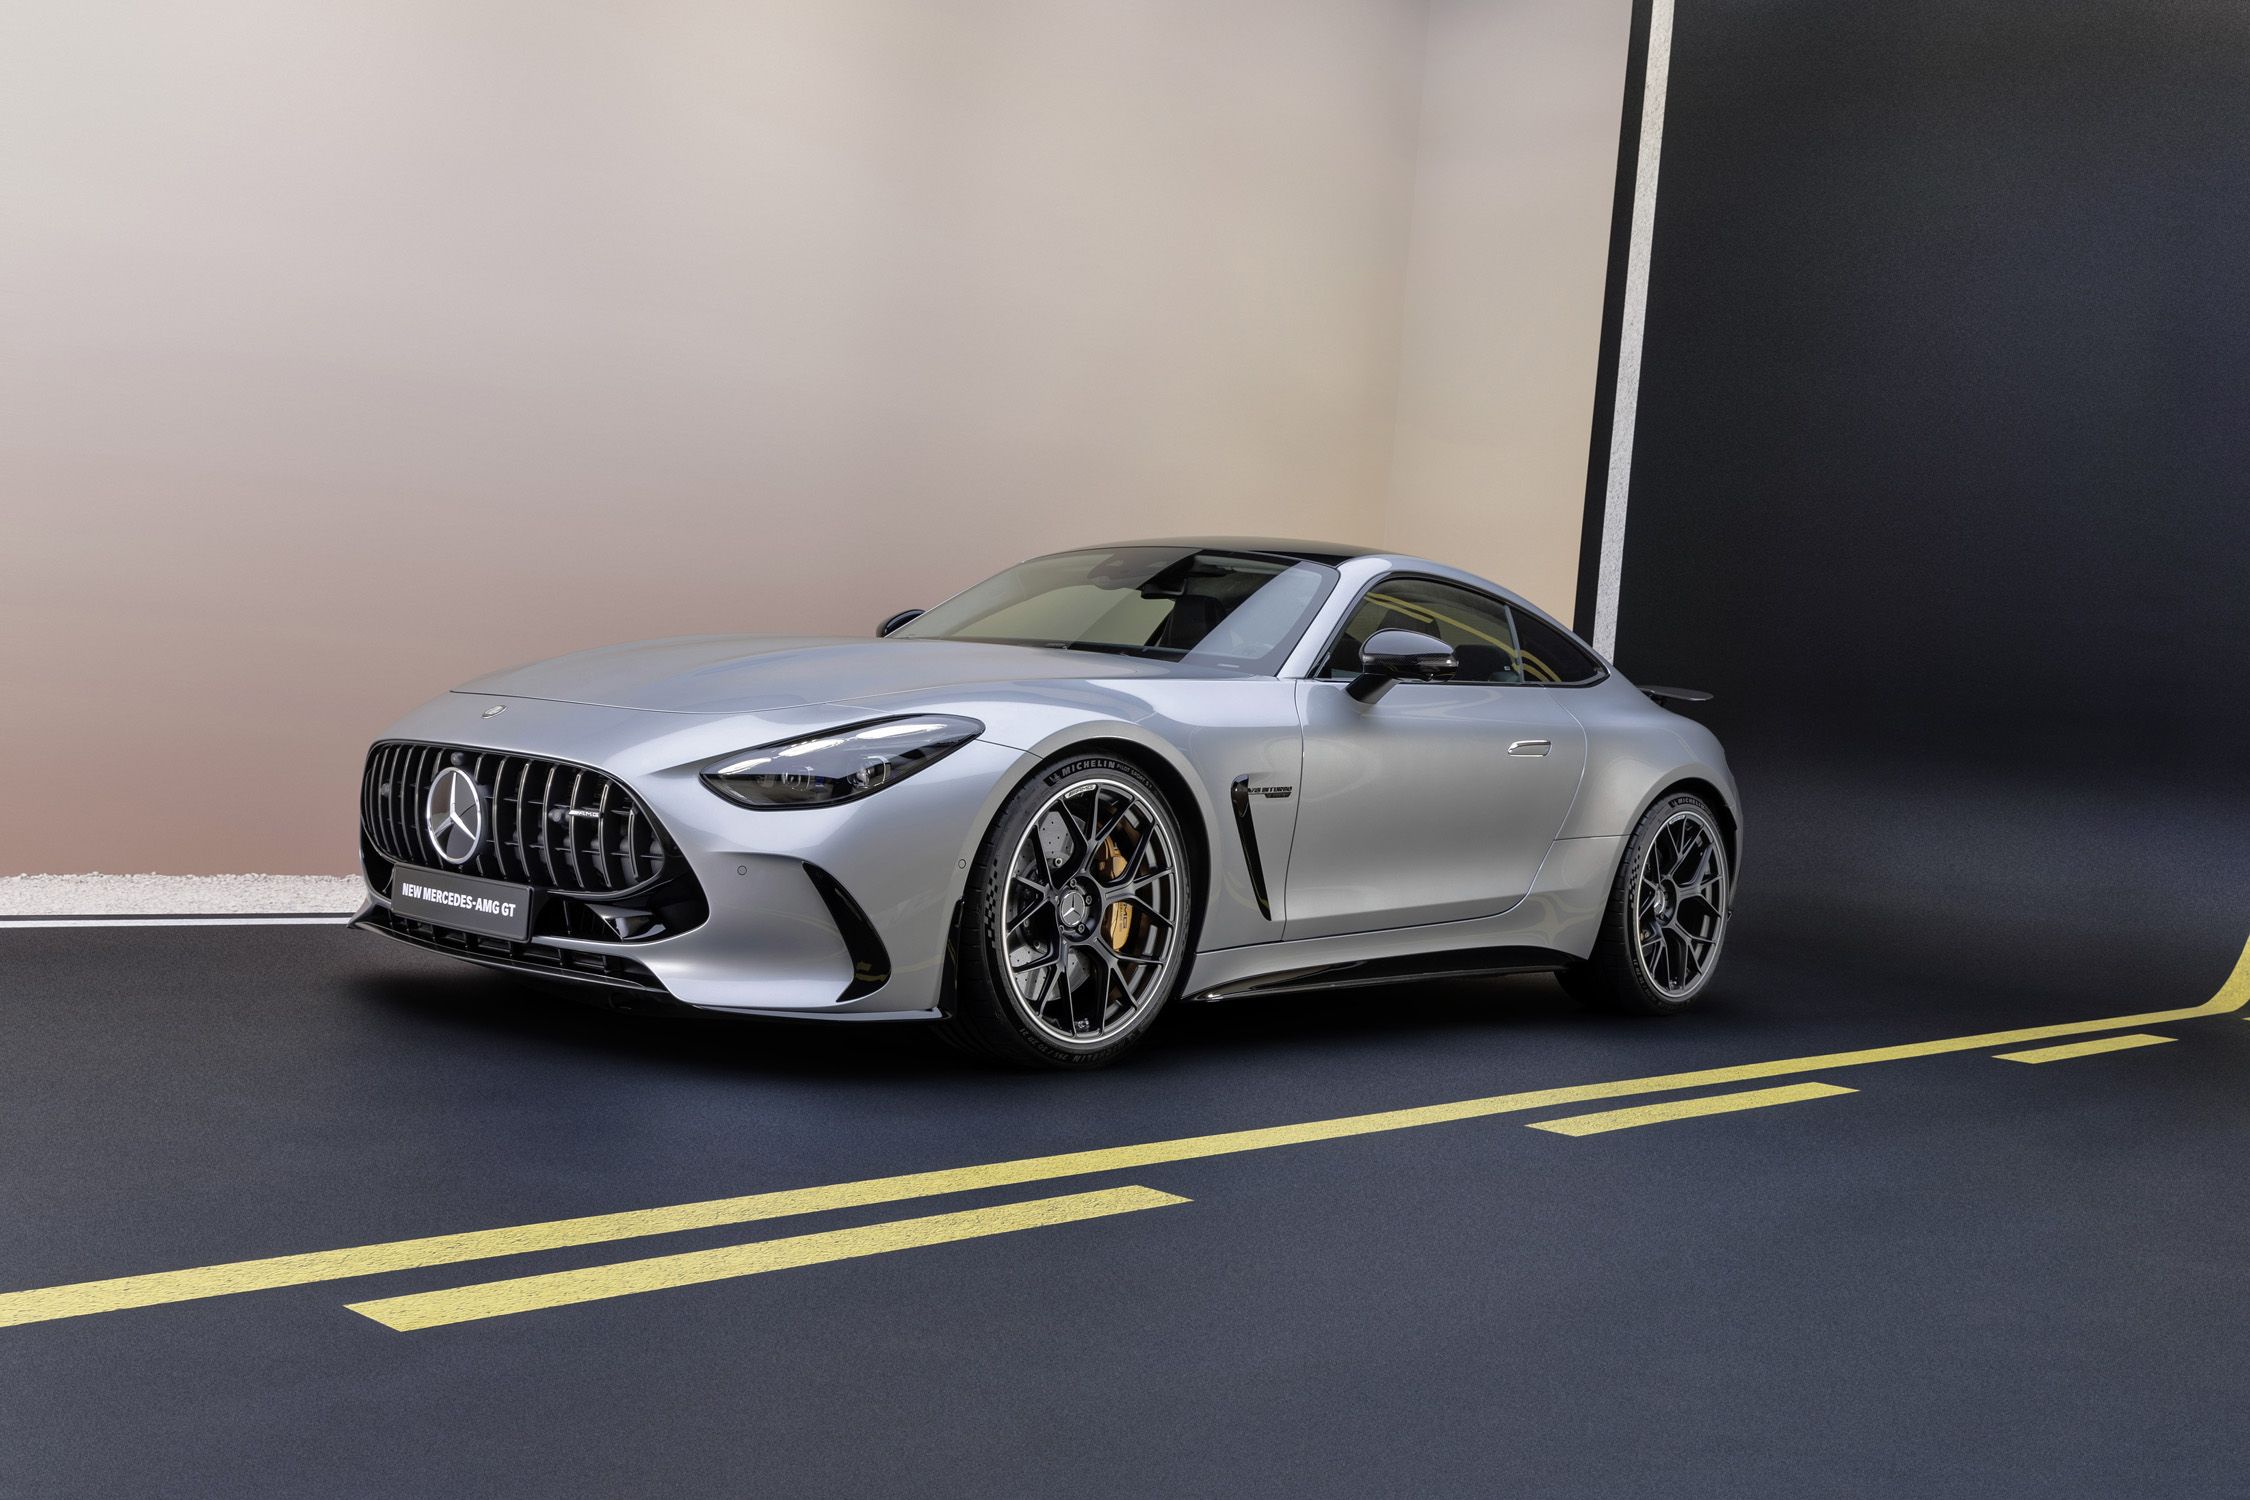 Get to Know the Upcoming 2024 Mercedes-AMG GT Coupe near Scottsdale, AZ -  Mercedes-Benz of Scottsdale